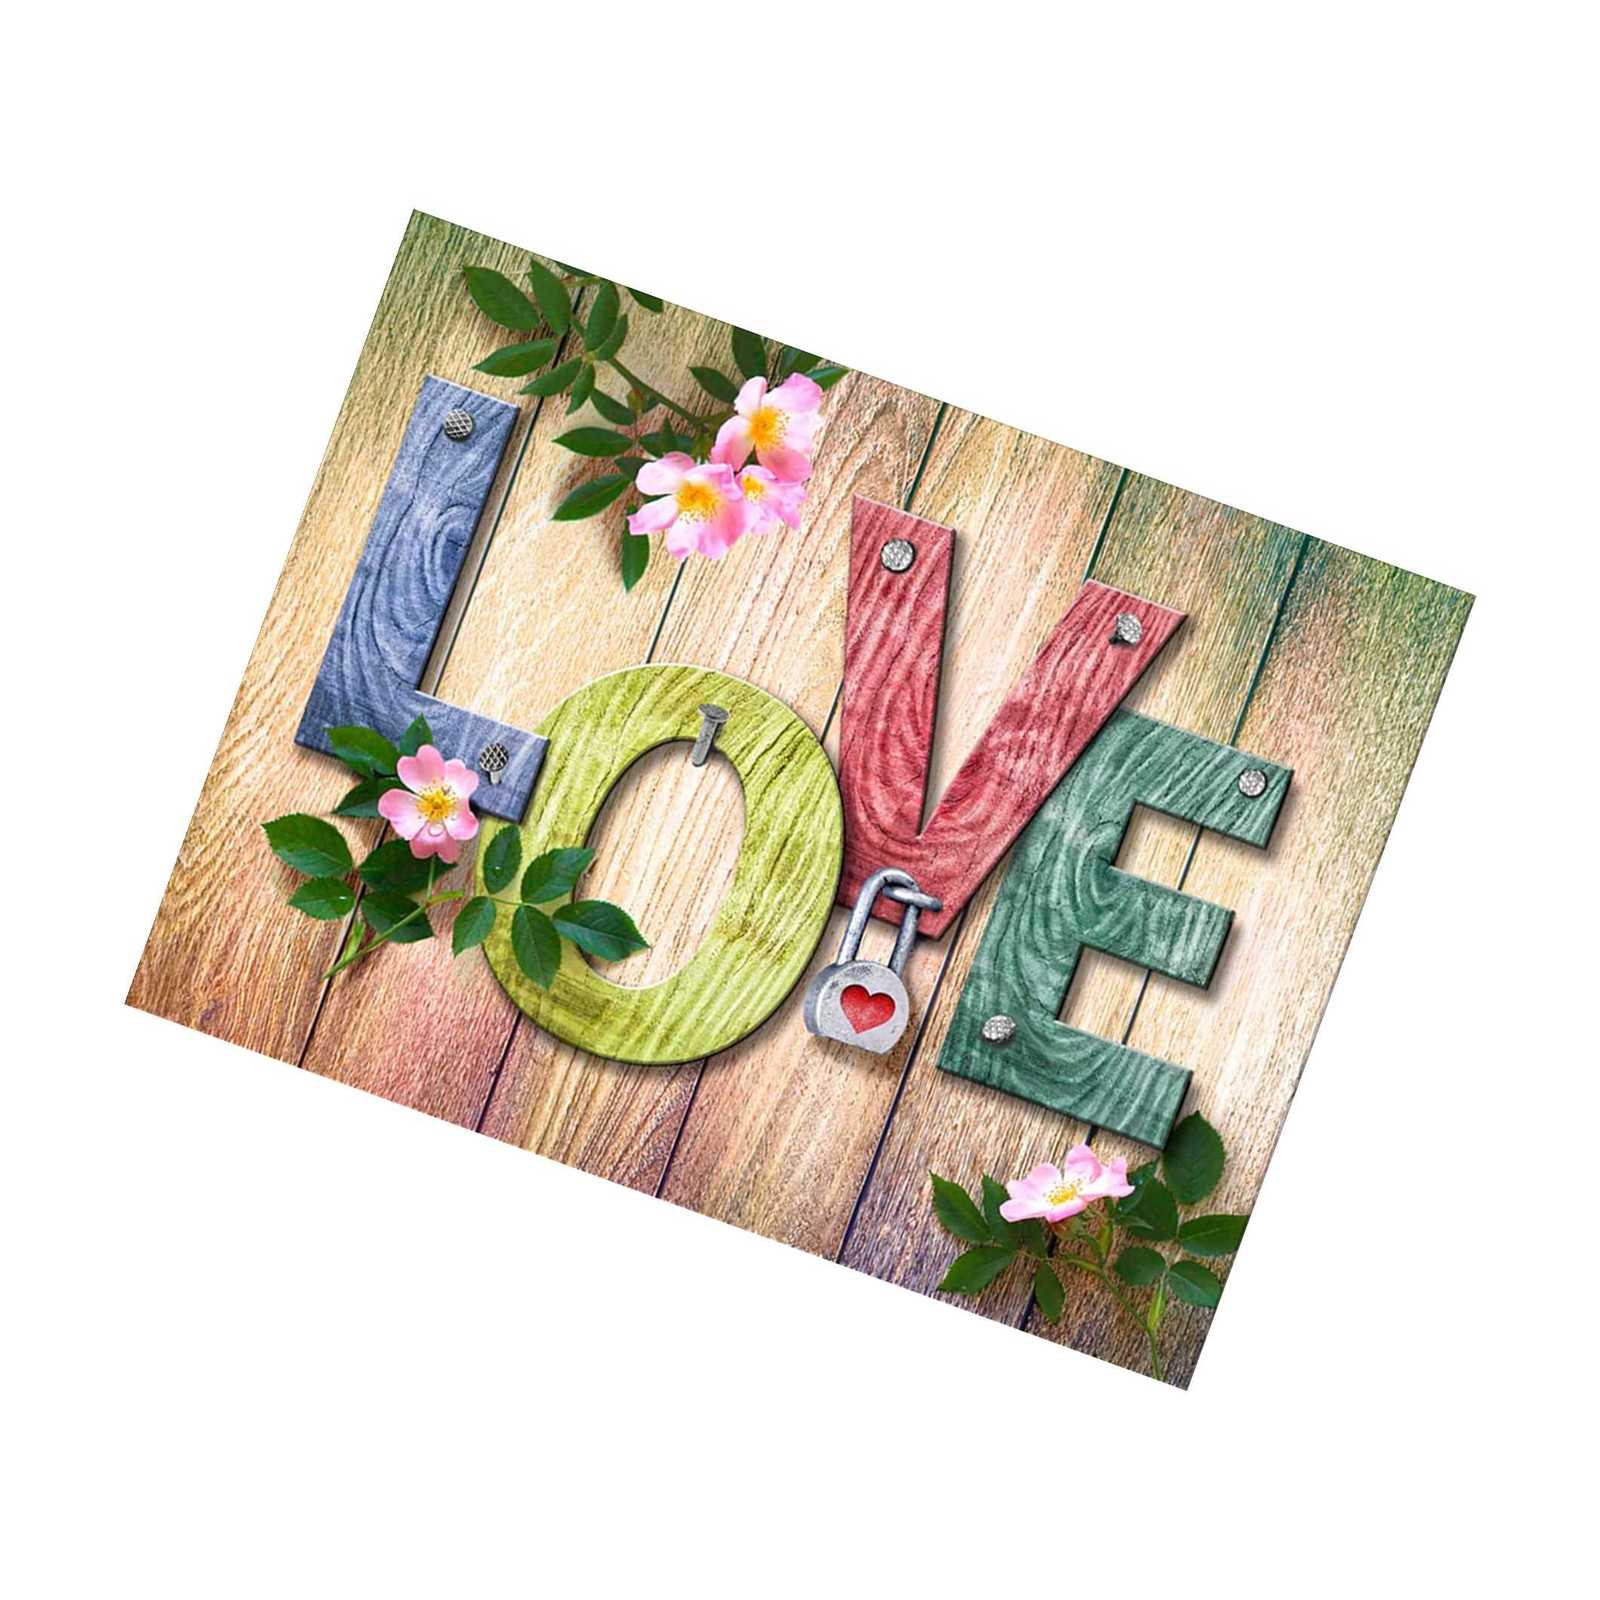 The L-O-V-E Diy 5D Painting Kits For Adults Kids Wall Hanging Painting Heart